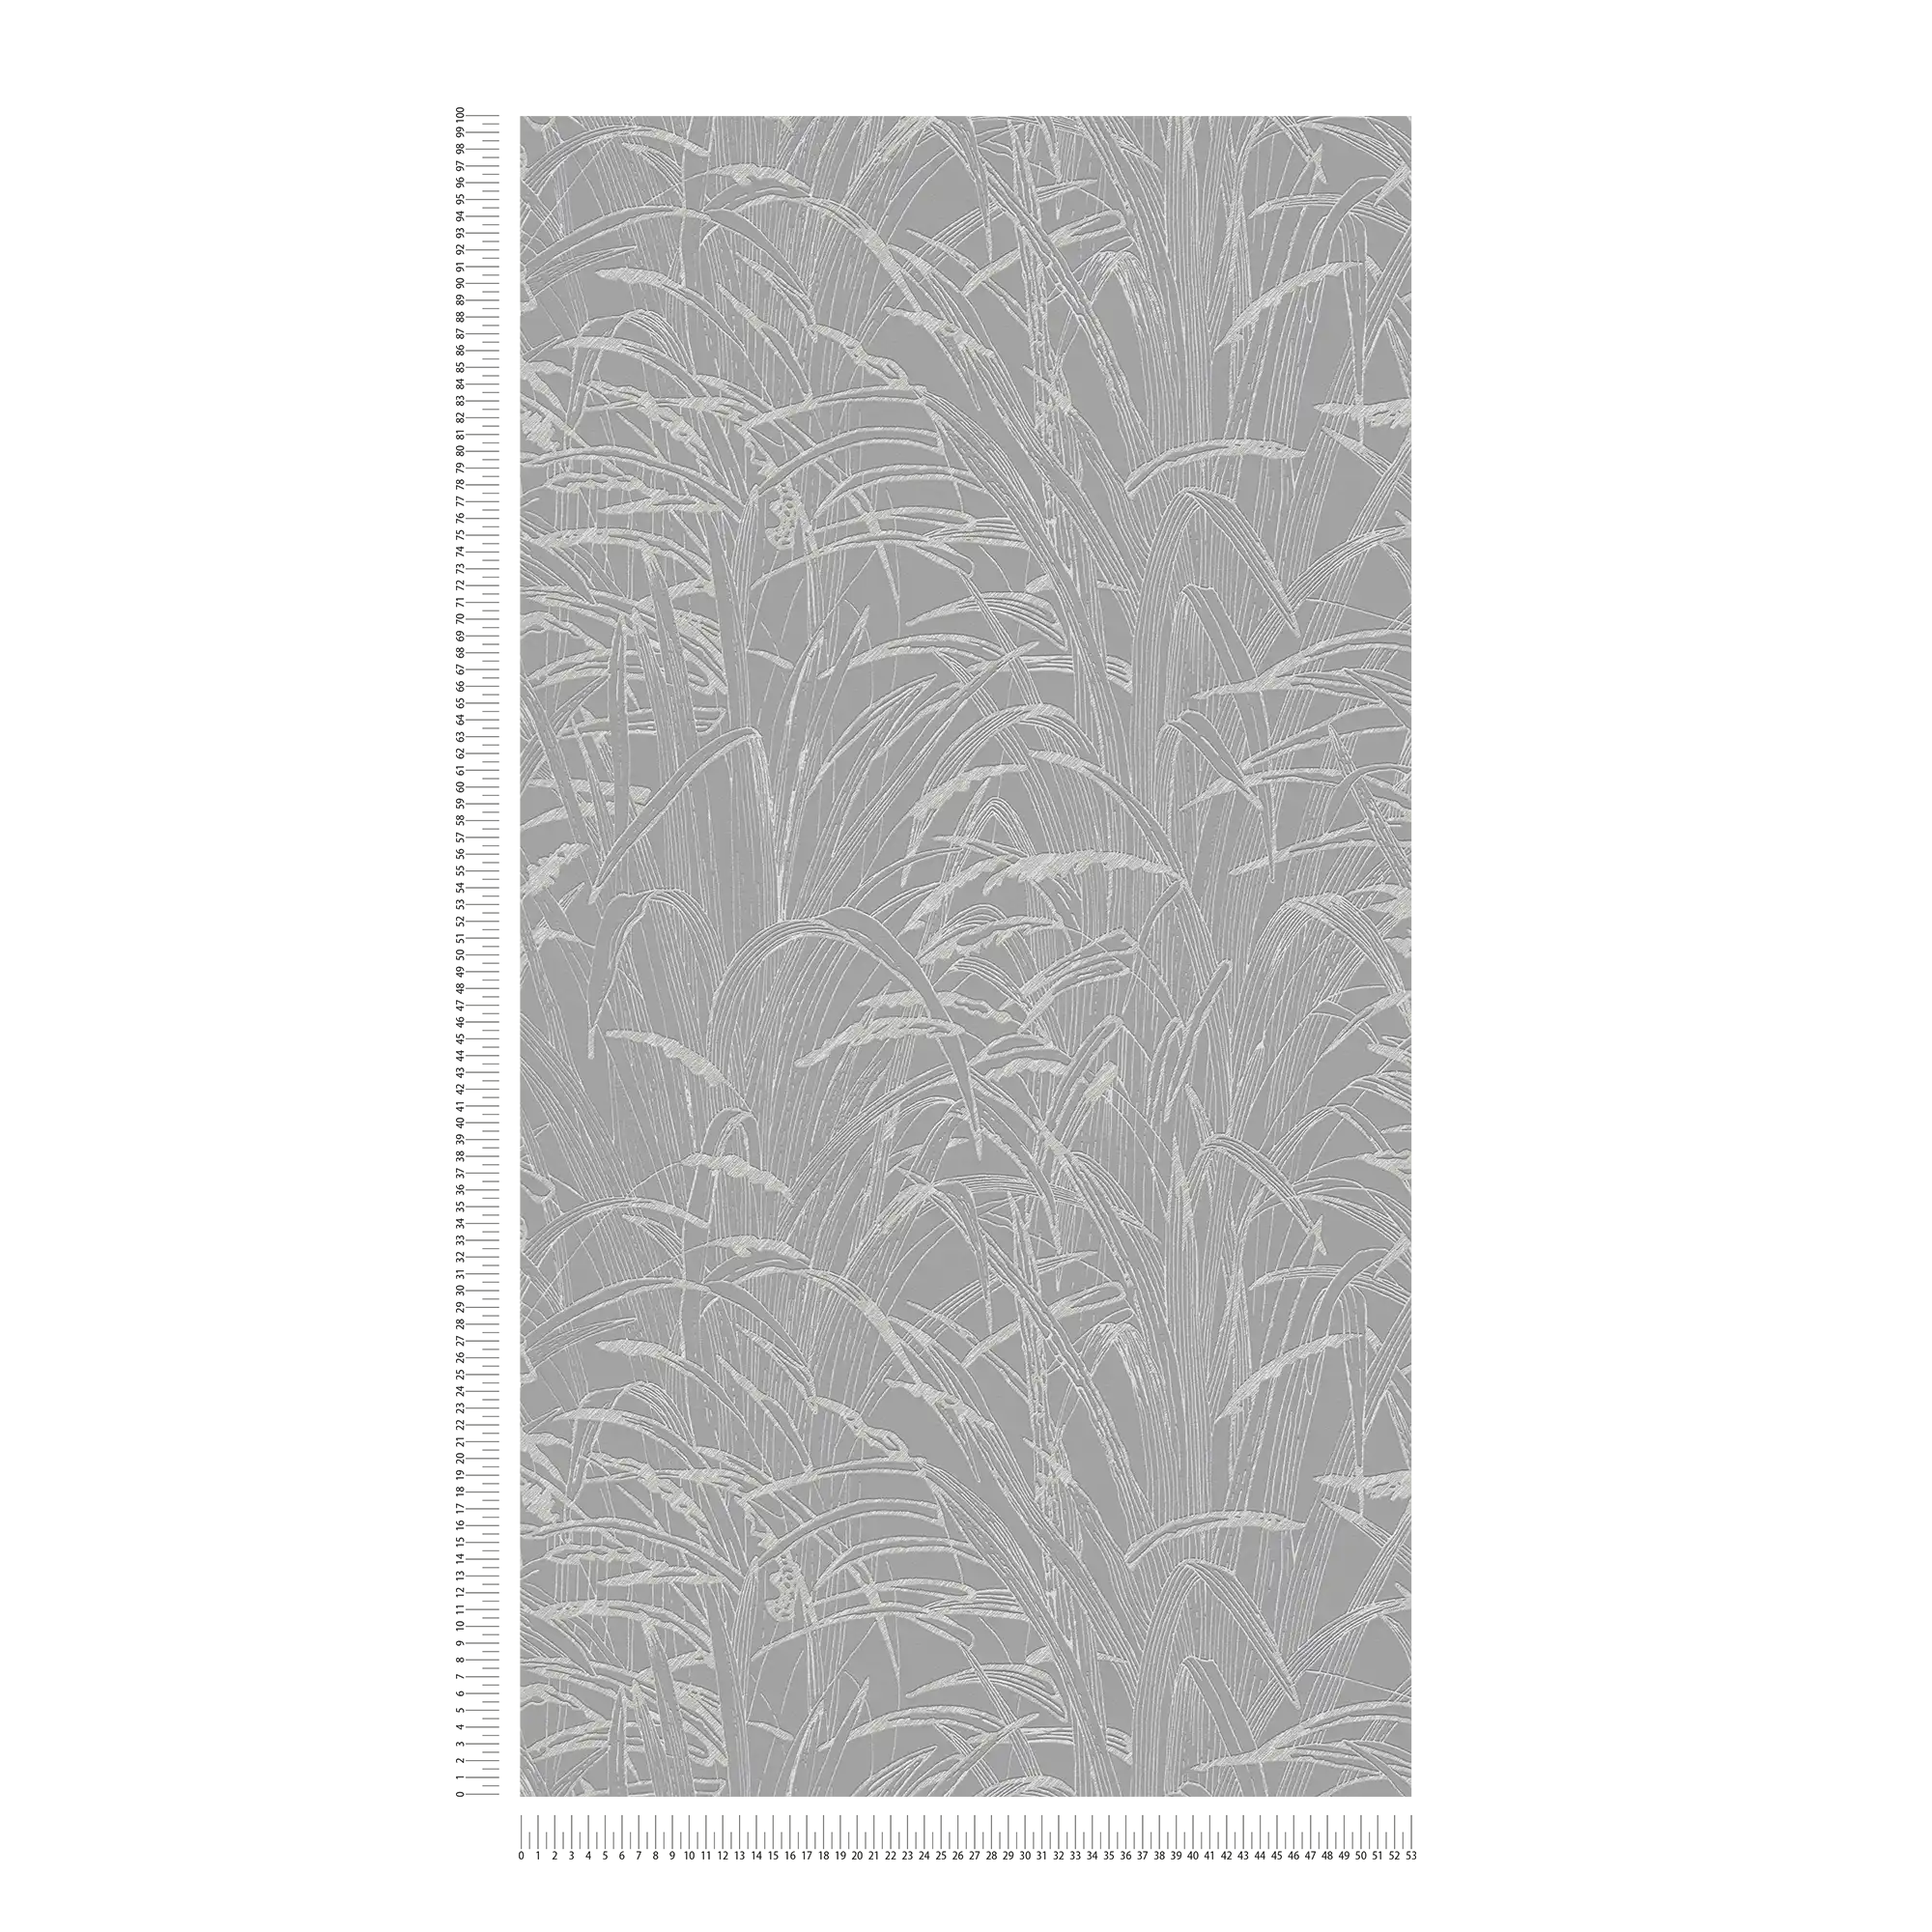             Nature wallpaper reed leaf with metallic colour - grey
        